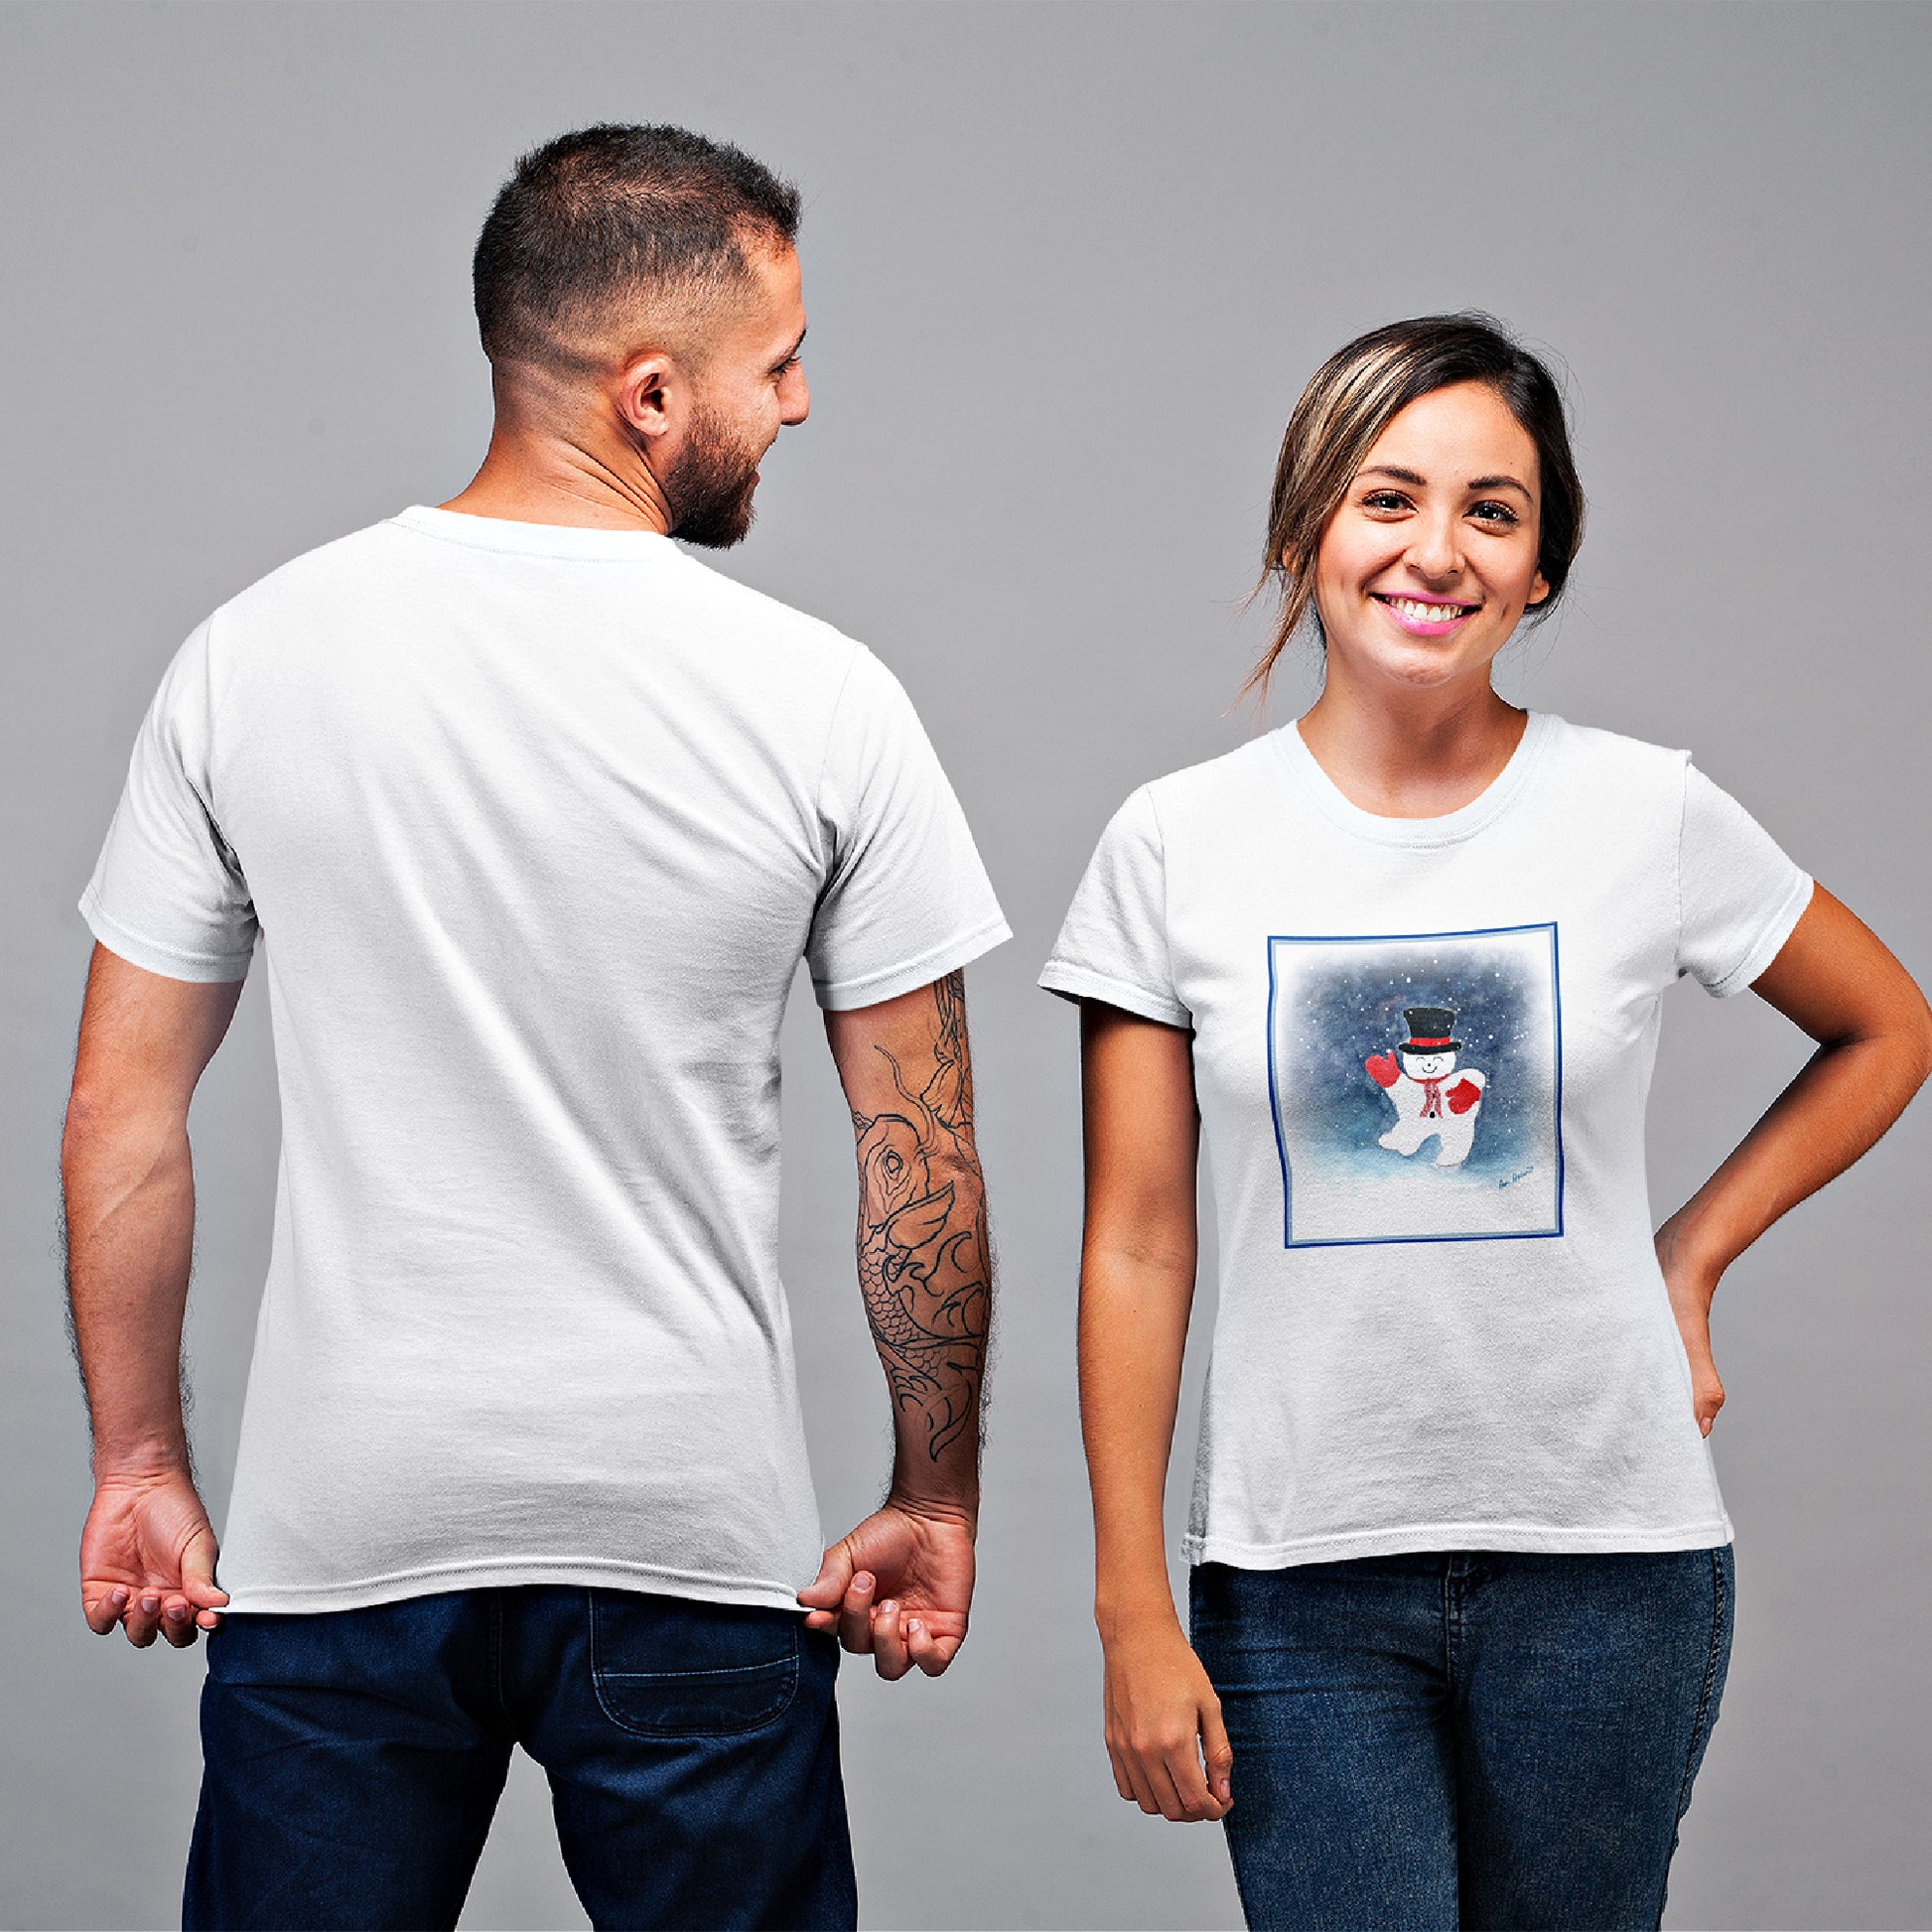 Mock up of a woman wearing our White Snowman T-shirt standing next to a man whose back is facing the camera